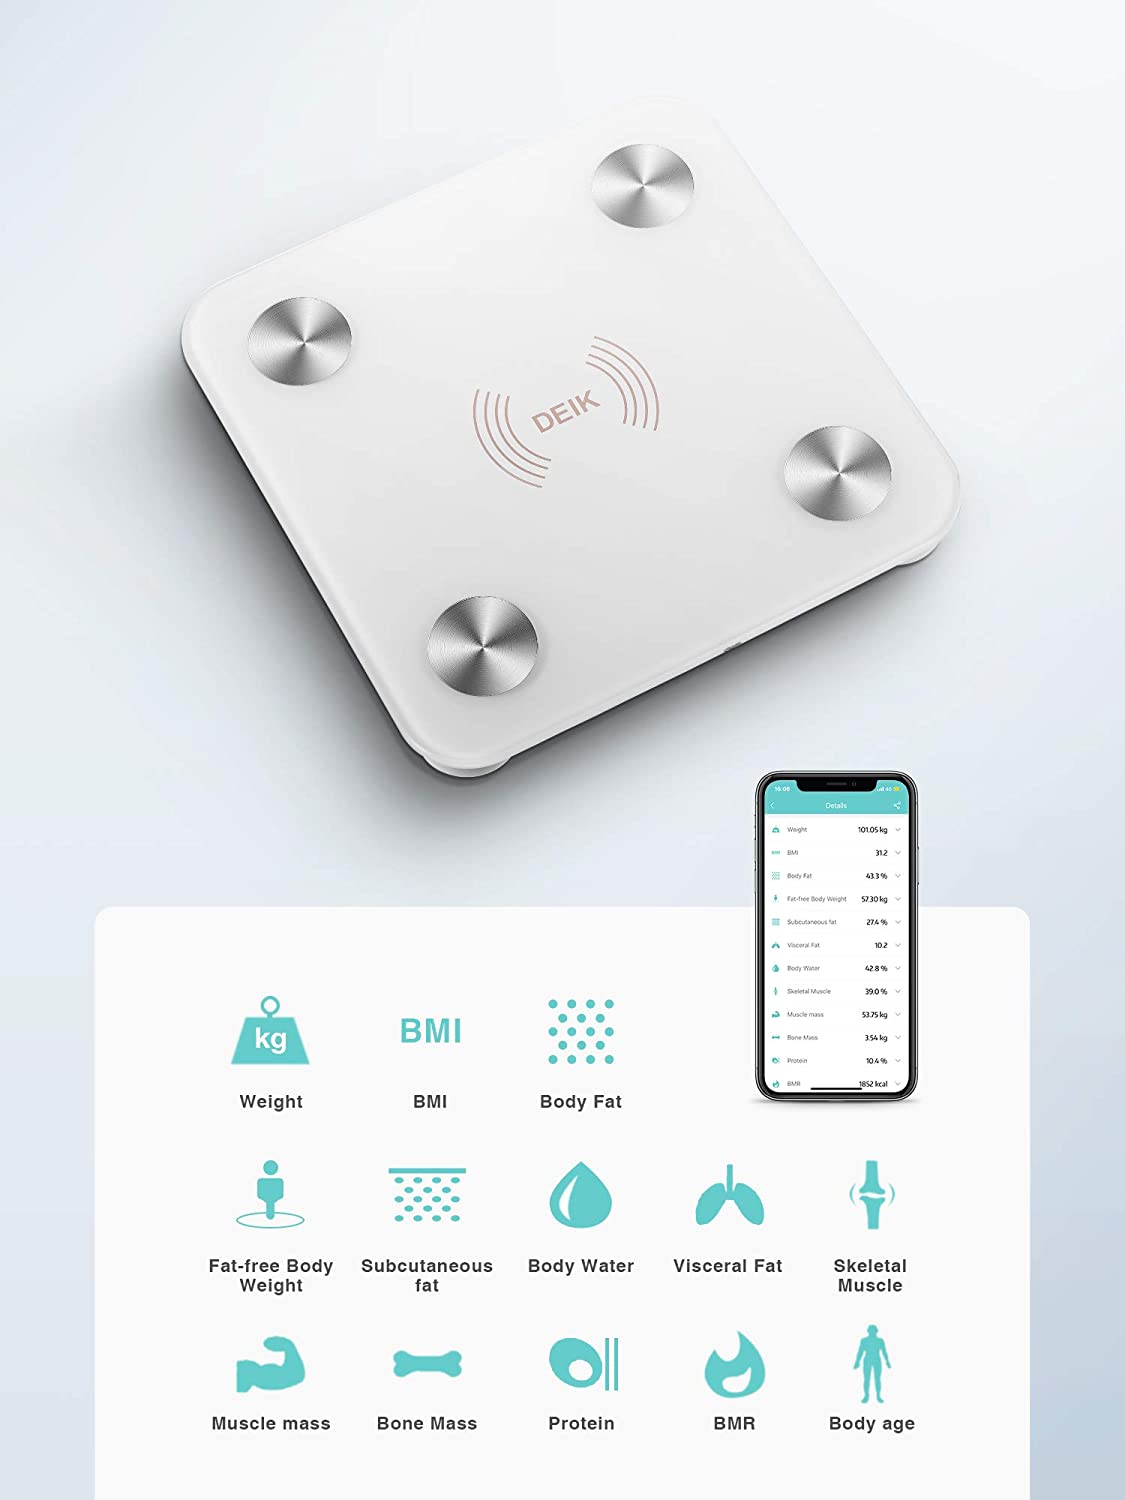 DEIK Smart Digital Body Fat Scale, White Bluetooth Bathroom Scale, with iOS and Android APP, 180kg/400lb High Precision Measurement, Detects 13 Data including Body Weight, Fat Content, Muscle Mass